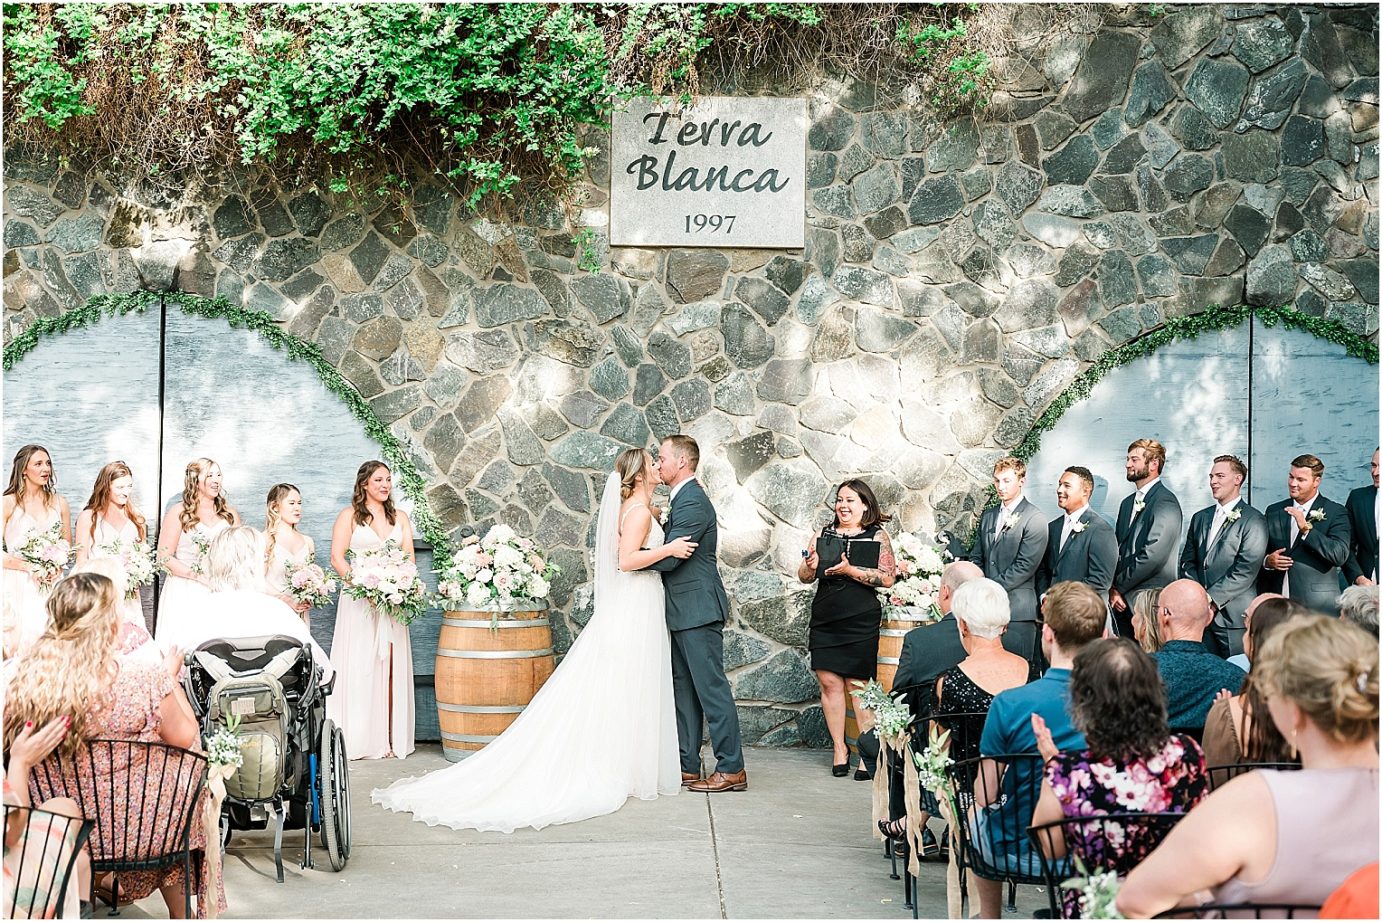 Bride and groom first kiss for wedding at Terra Blanca Winery